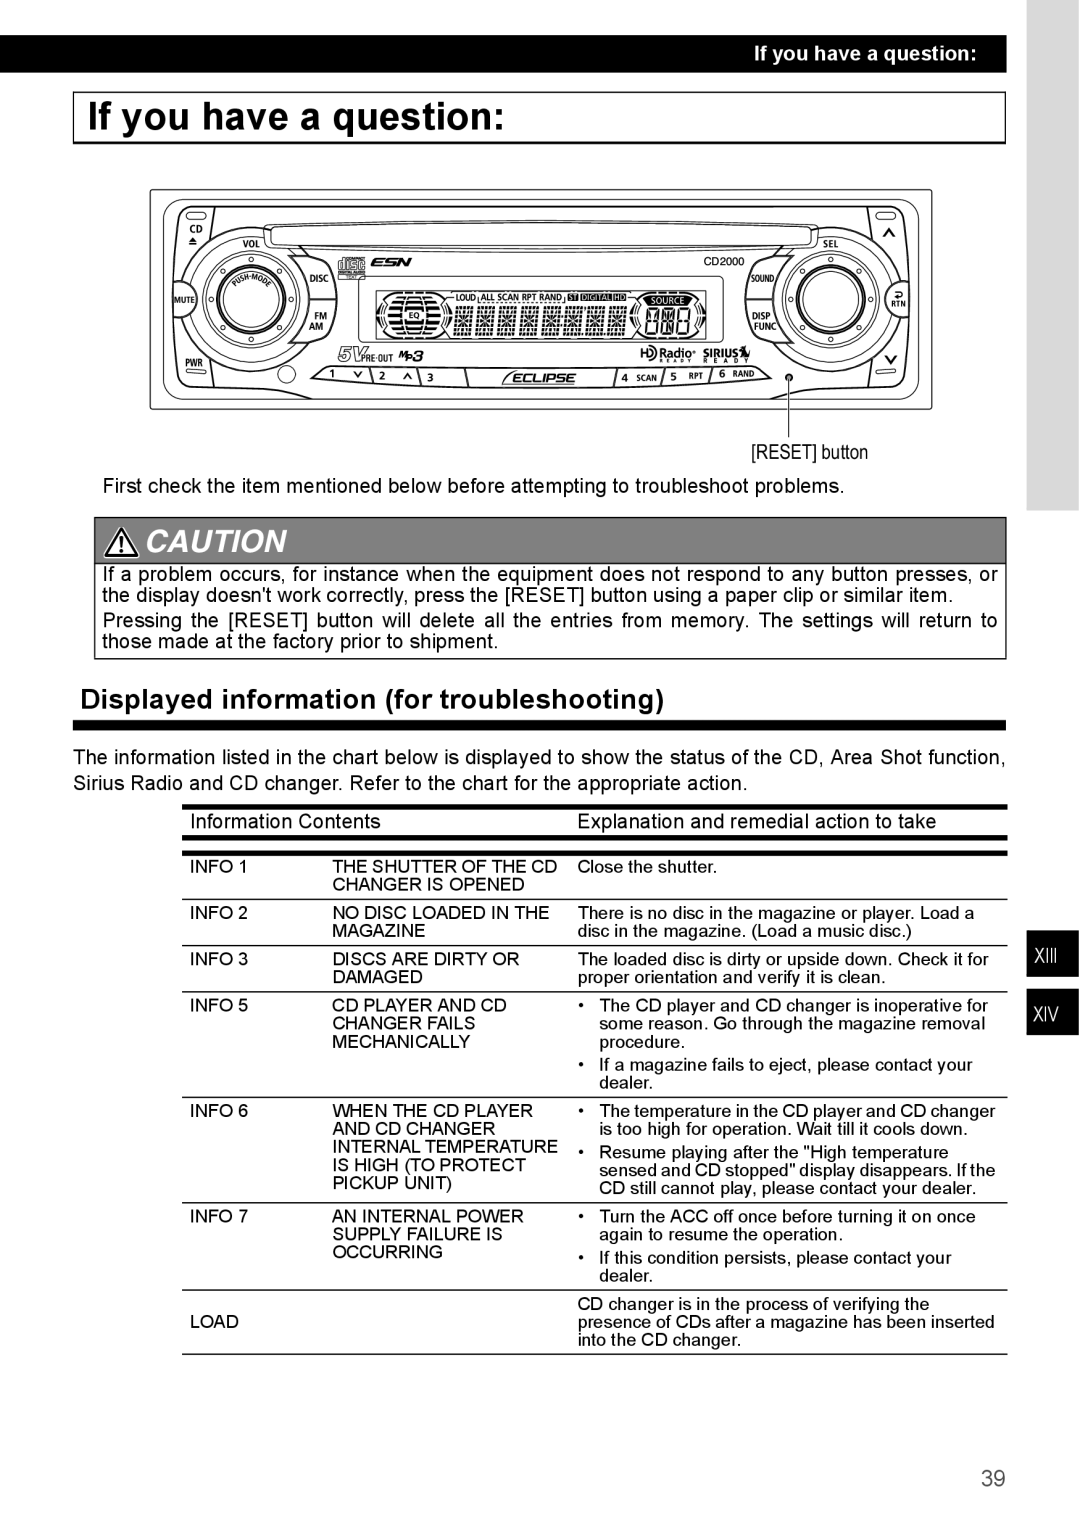 Eclipse - Fujitsu Ten CD2000 manual If you have a question, Displayed information for troubleshooting, Xiii Xiv 